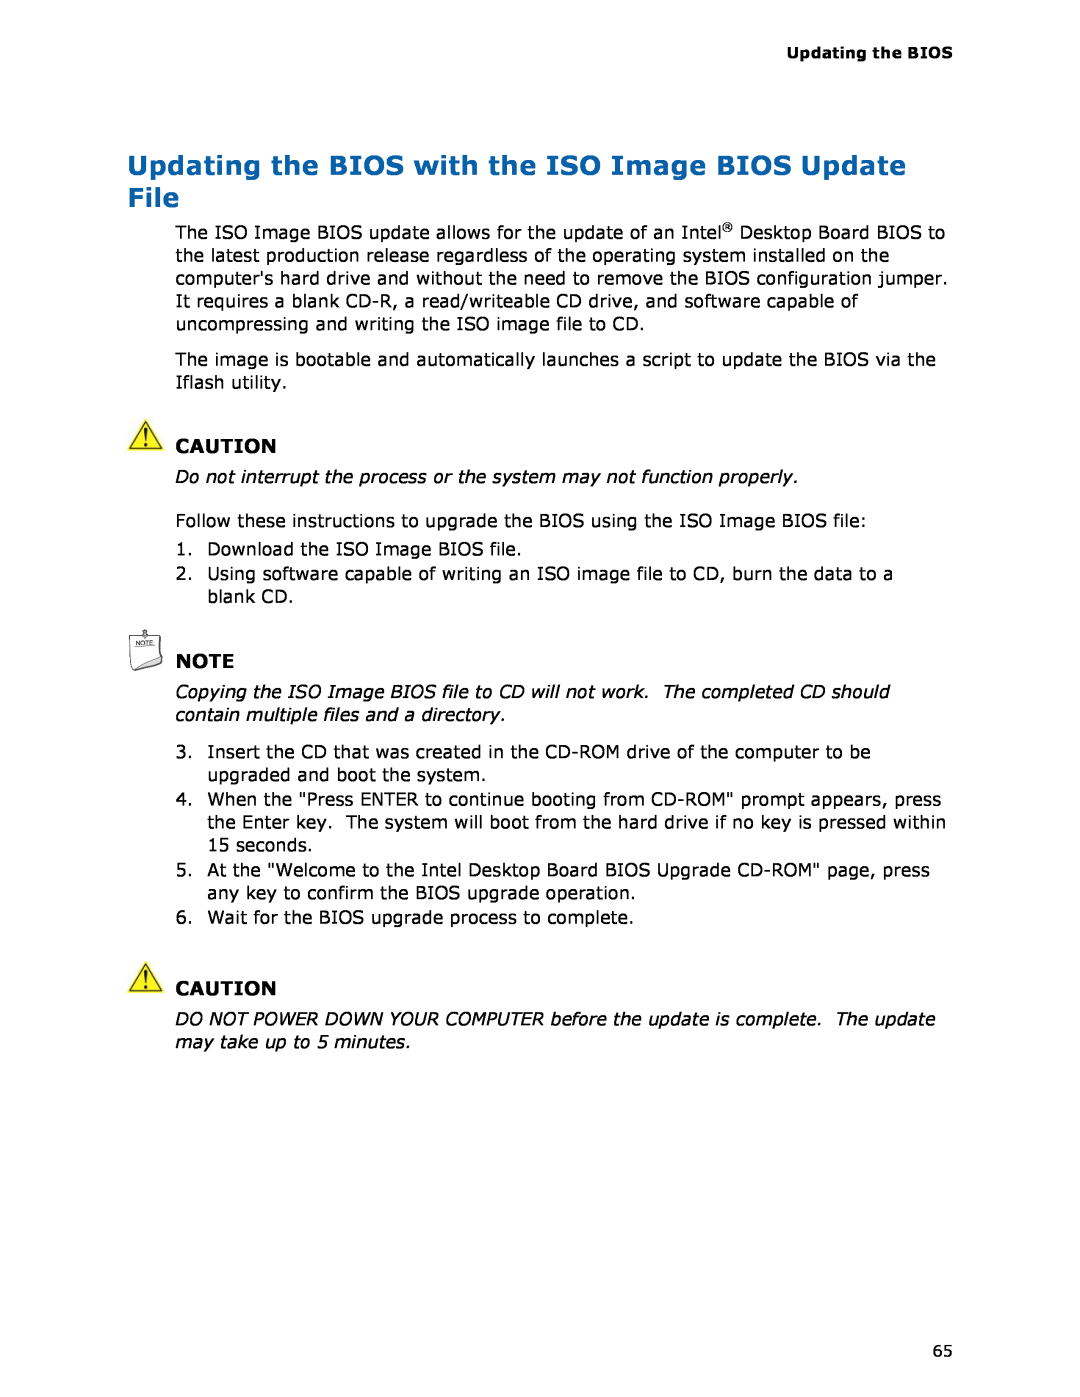 Intel BOXDH55HC manual Updating the BIOS with the ISO Image BIOS Update File 